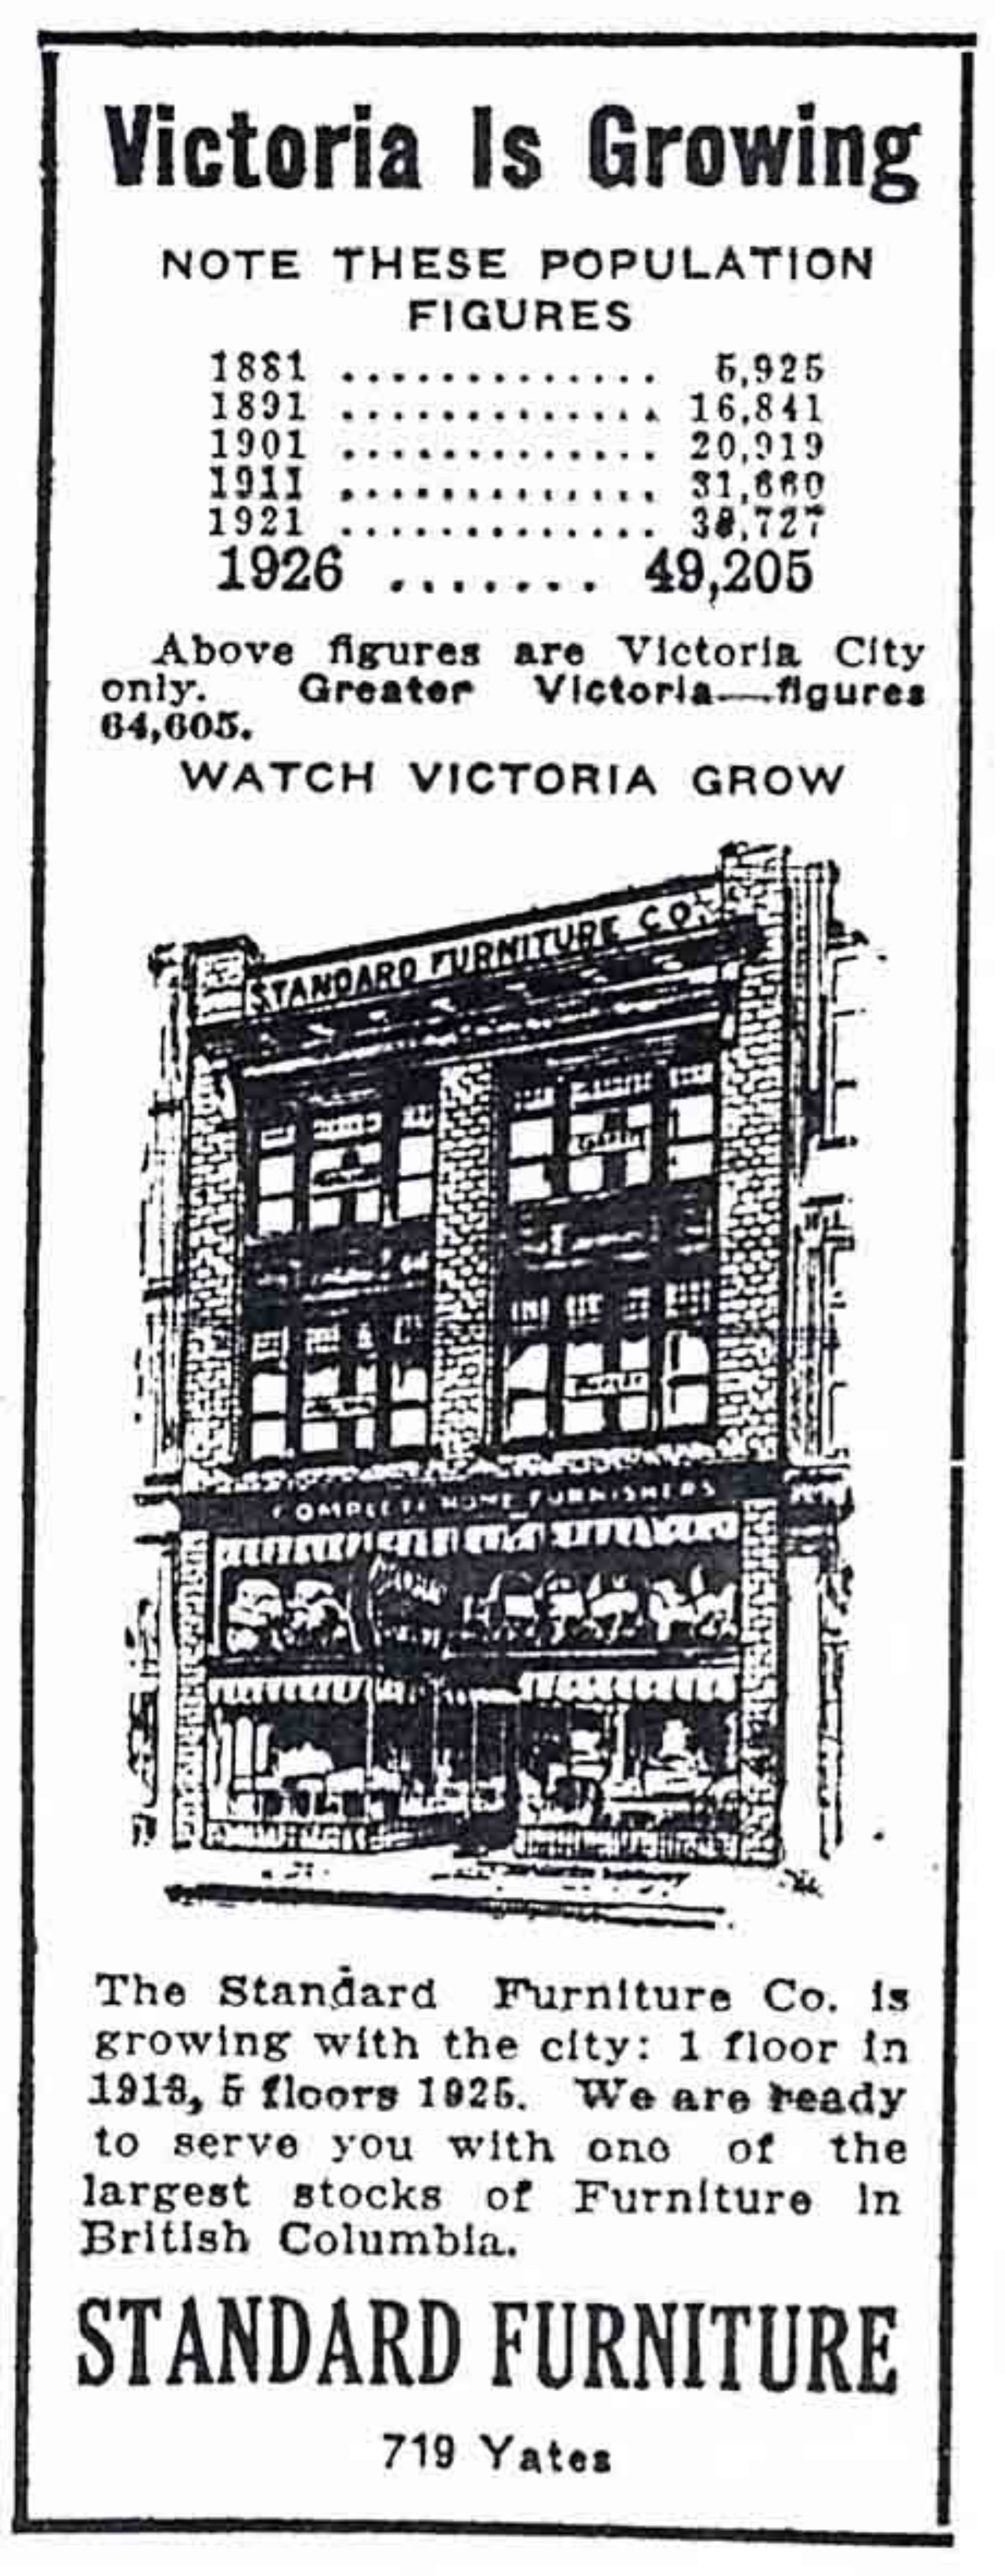 1926 advertisement showing Standard Furniture occupying the Finch Building at 719 Yates Street (Victoria Online Sightseeing Tours collection)